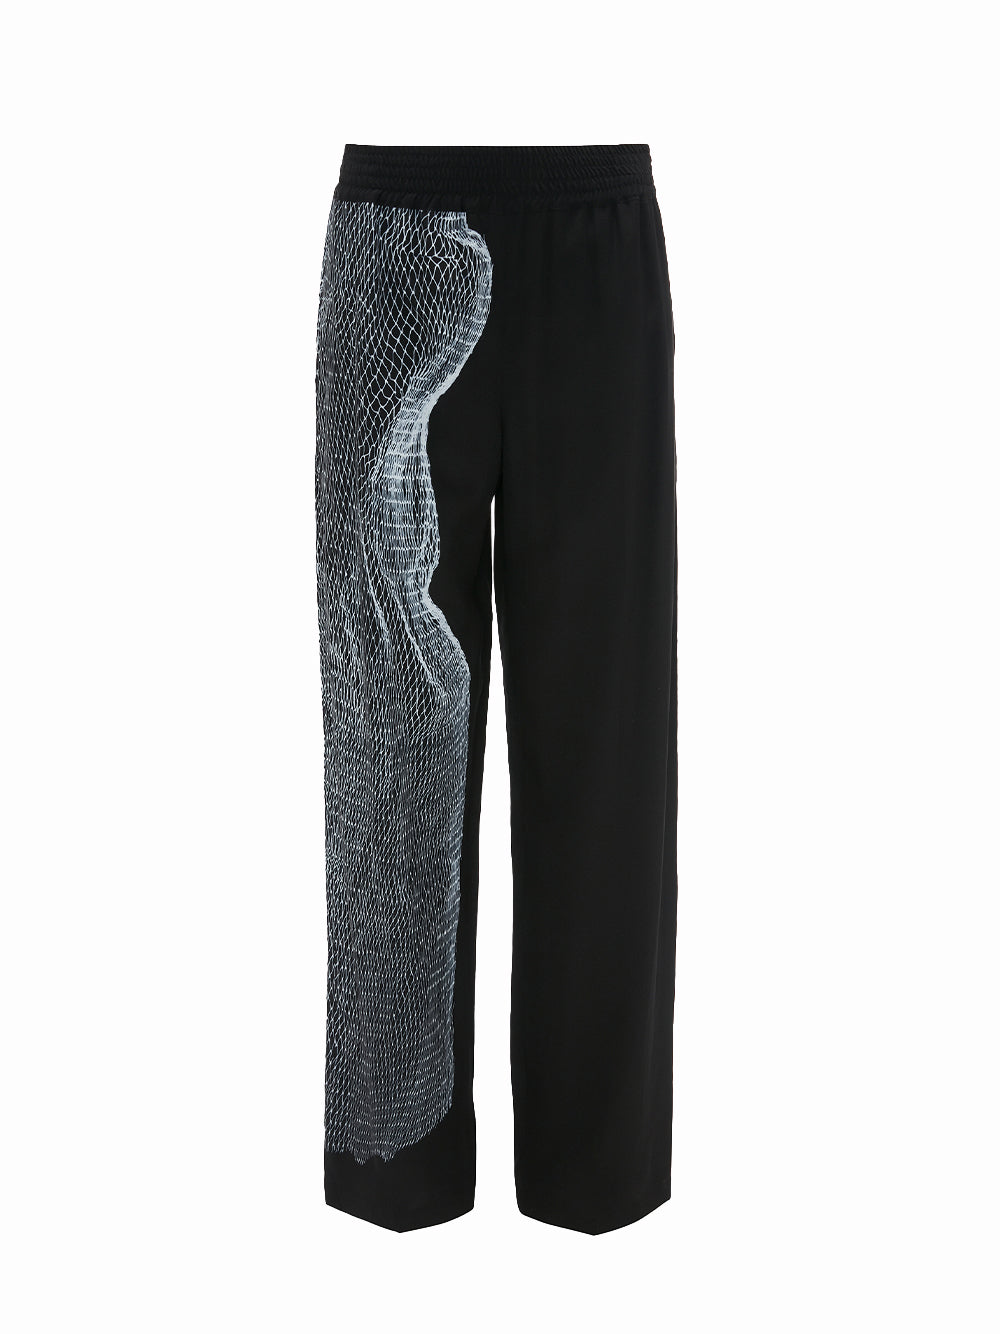 Pajama Trouser Contorted Net (Black/White)